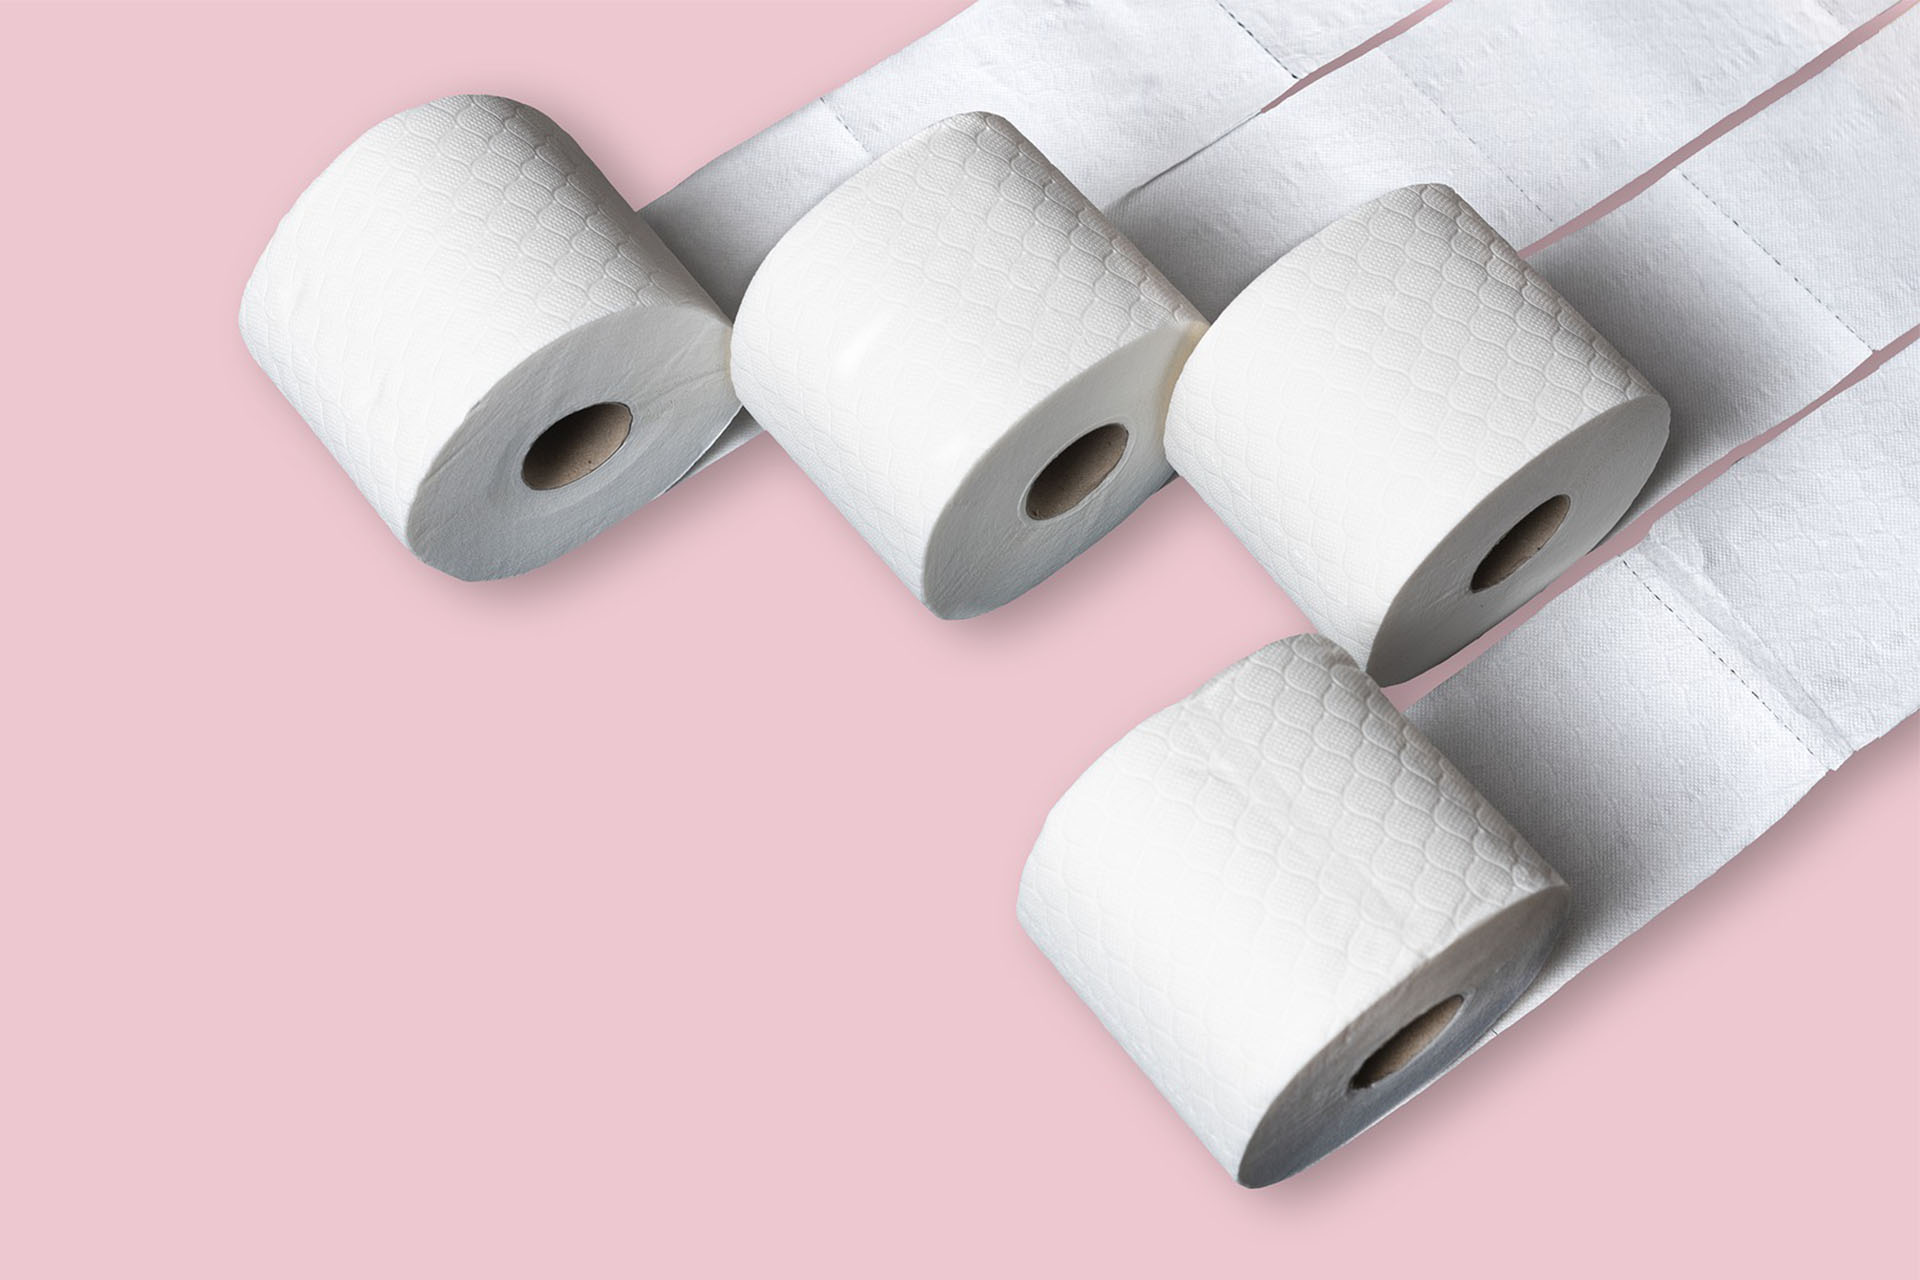 Four rolls of toilet paper on a pink background